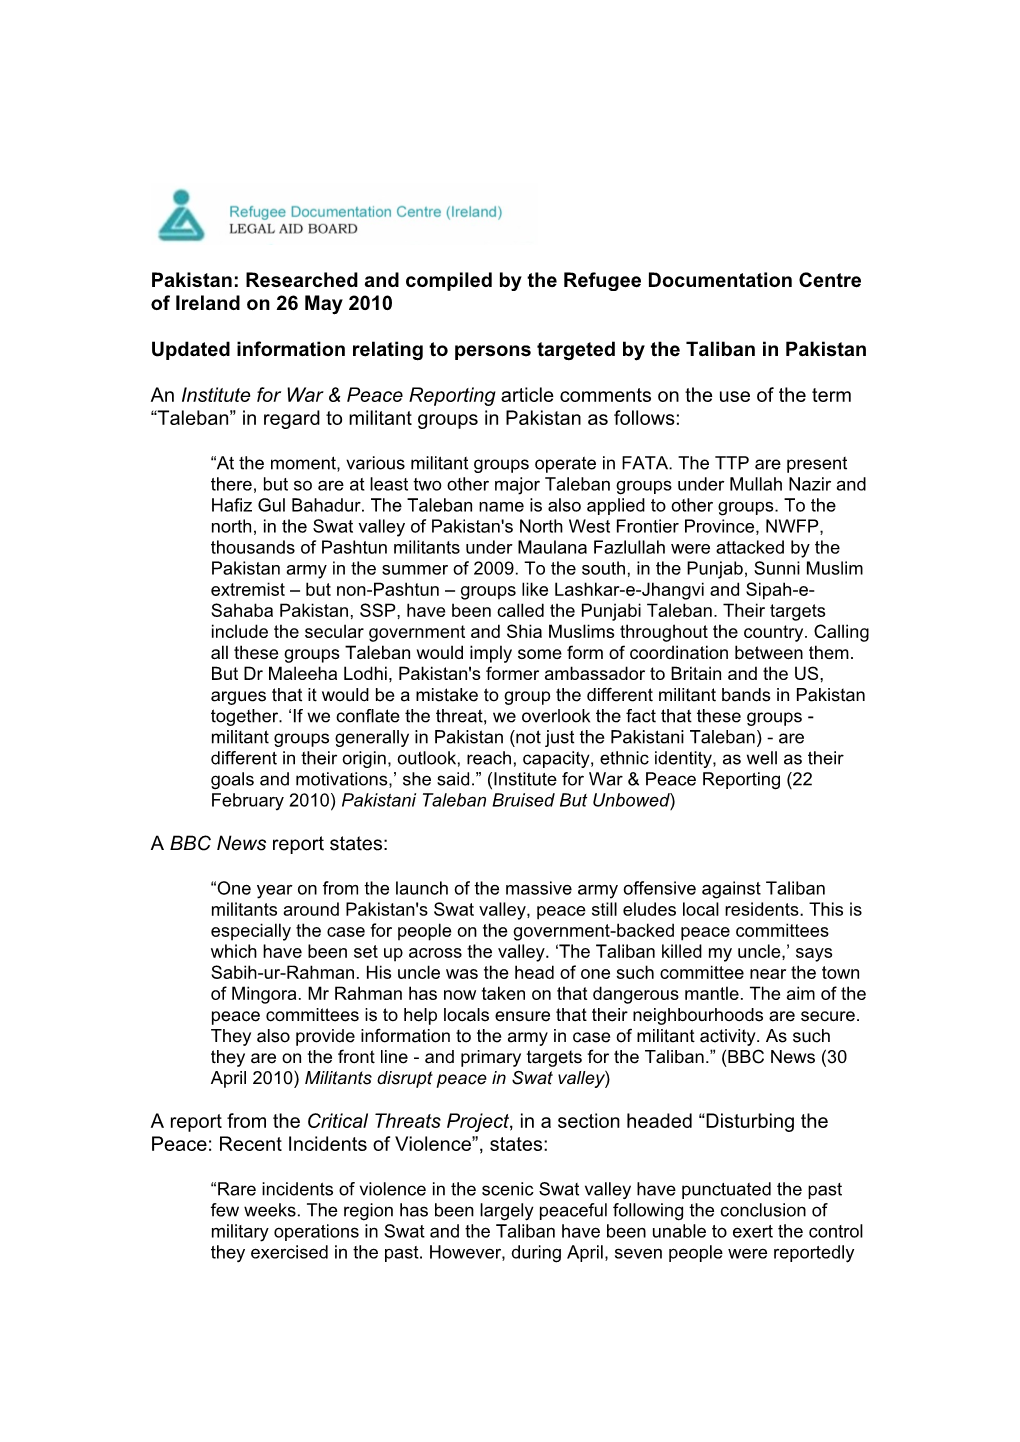 Pakistan: Researched and Compiled by the Refugee Documentation Centre of Ireland on 26 May 2010